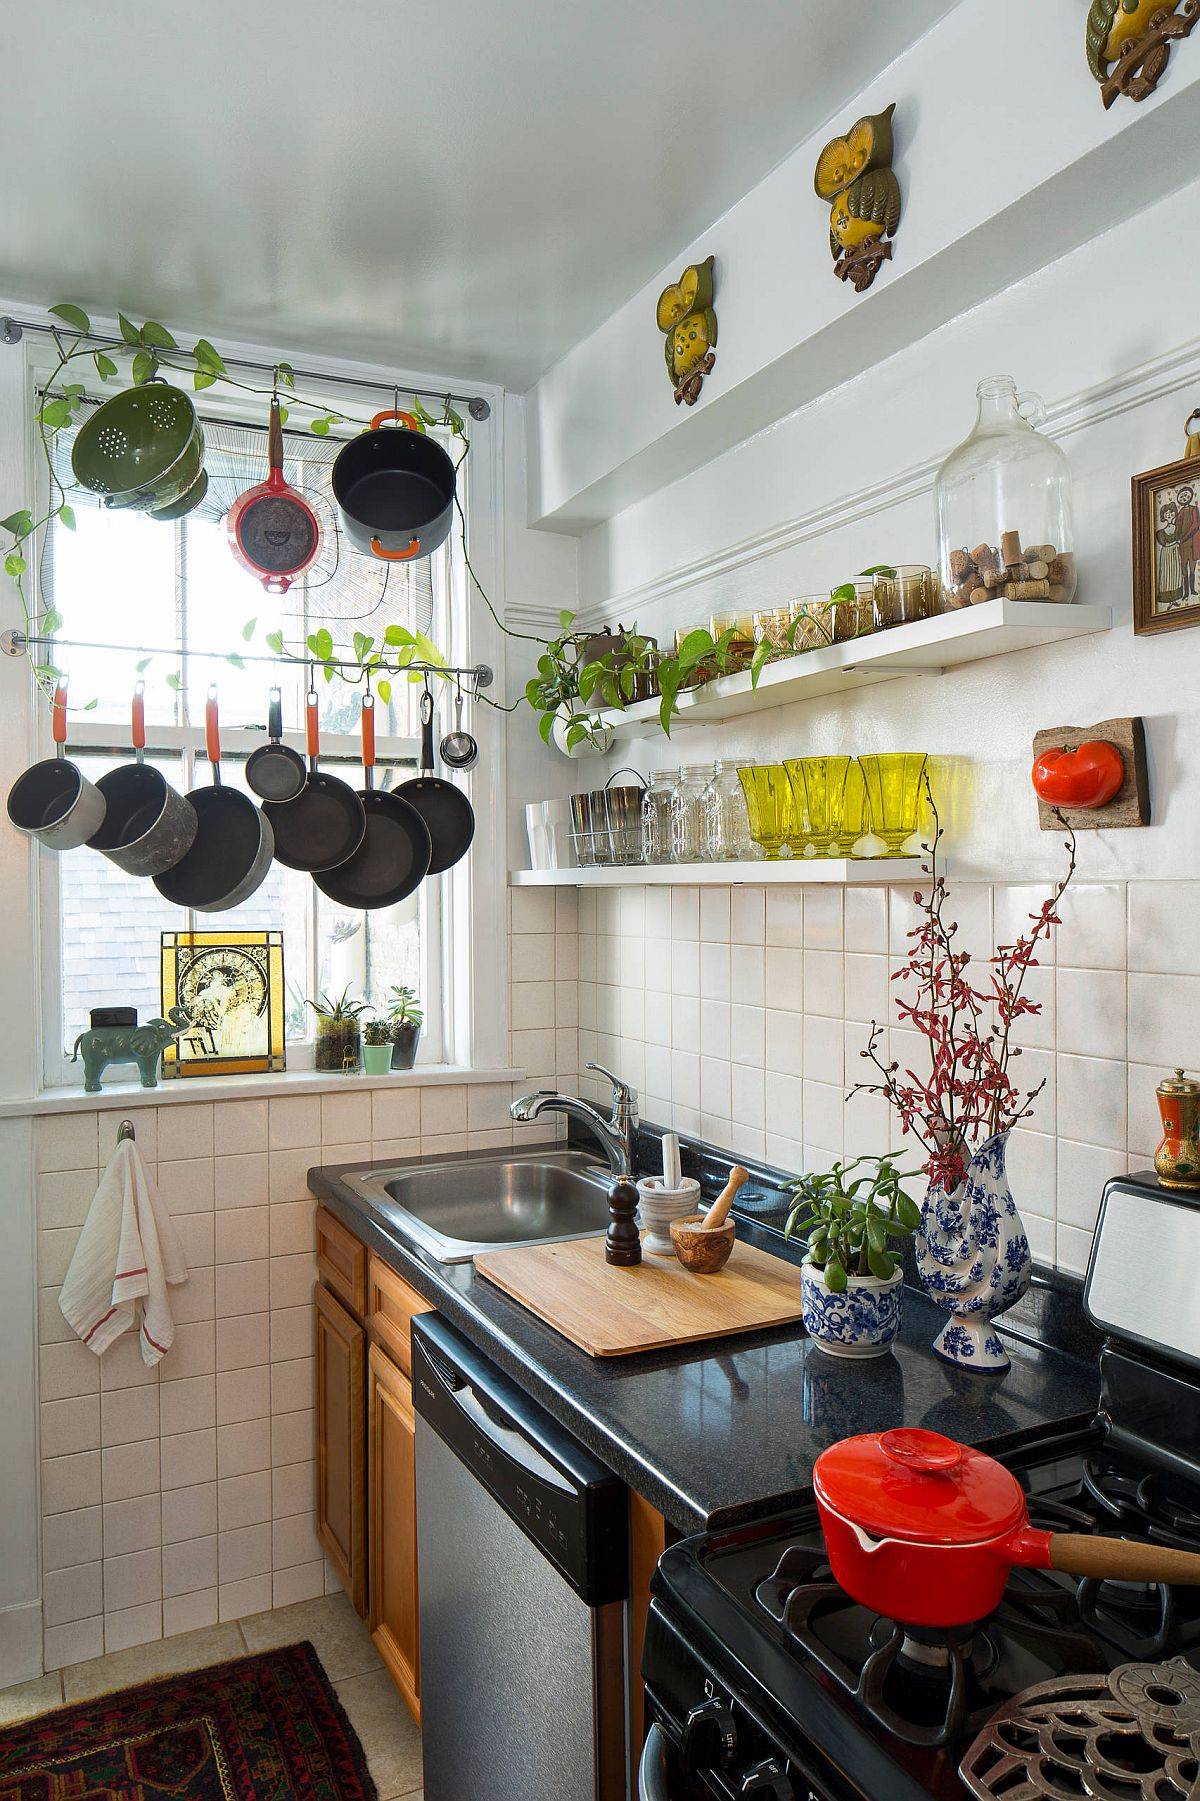 Small and eclectic single wall kitchen with space to hang the pots and pans